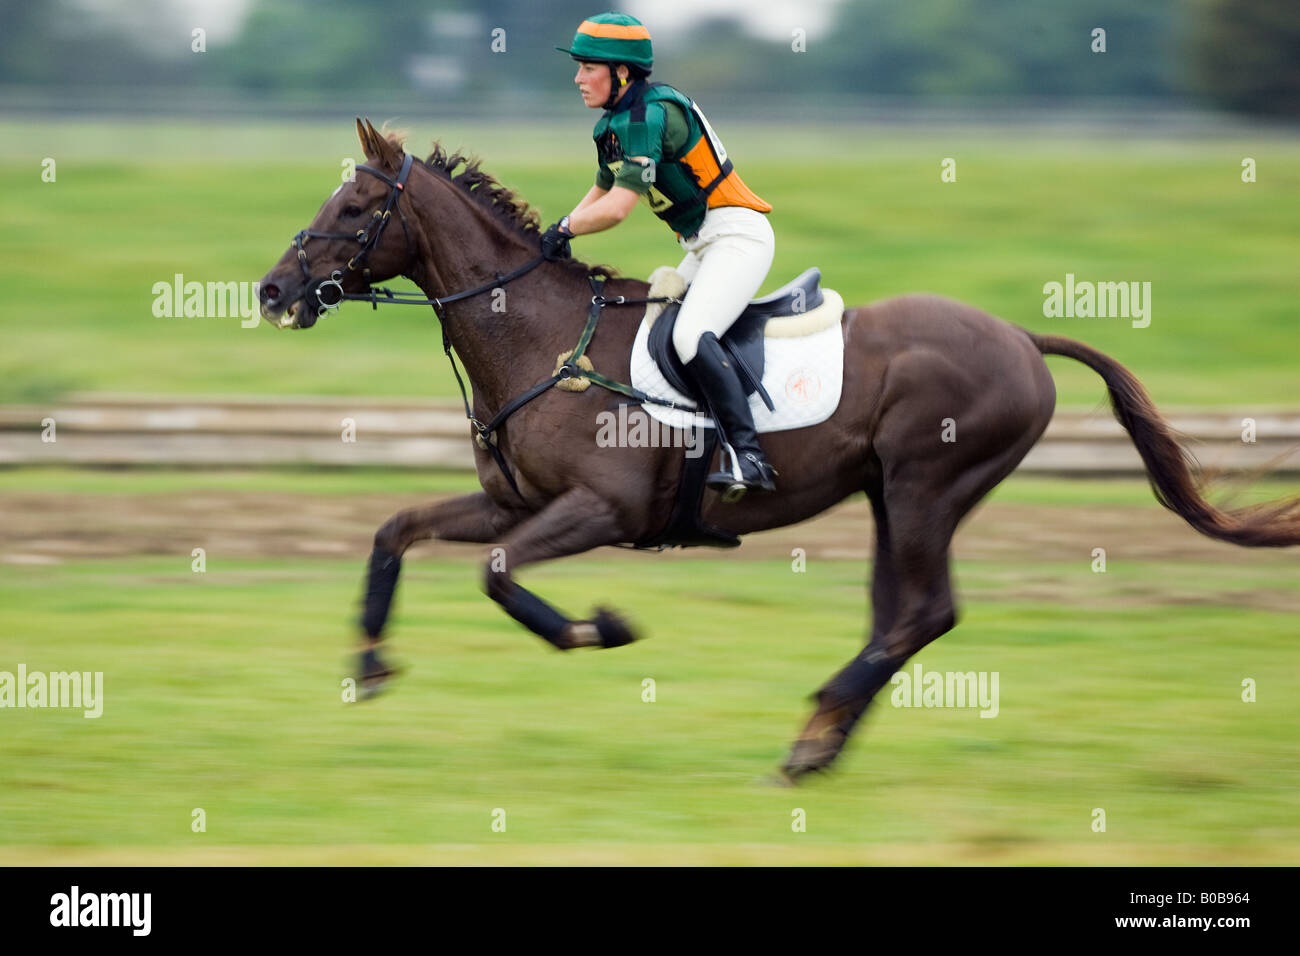 Horse and rider in the cross country phase of an eventing competition Charlton Park Wiltshire United Kingdom Stock Photo